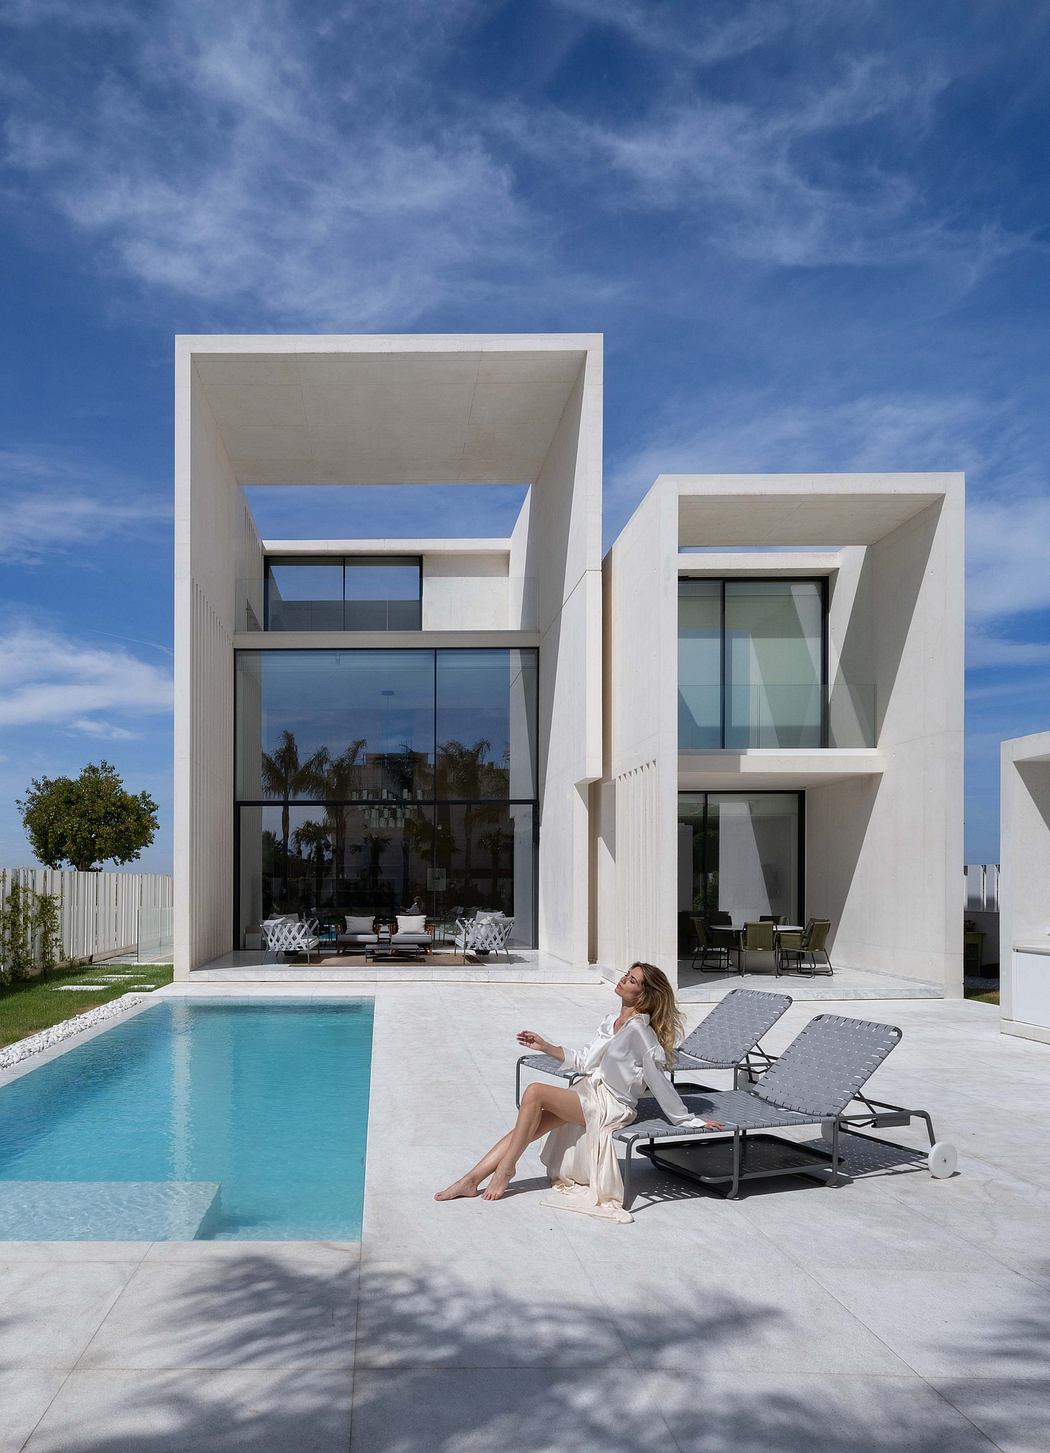 Sleek, modern architecture with clean lines, expansive glass panels, and a serene pool.